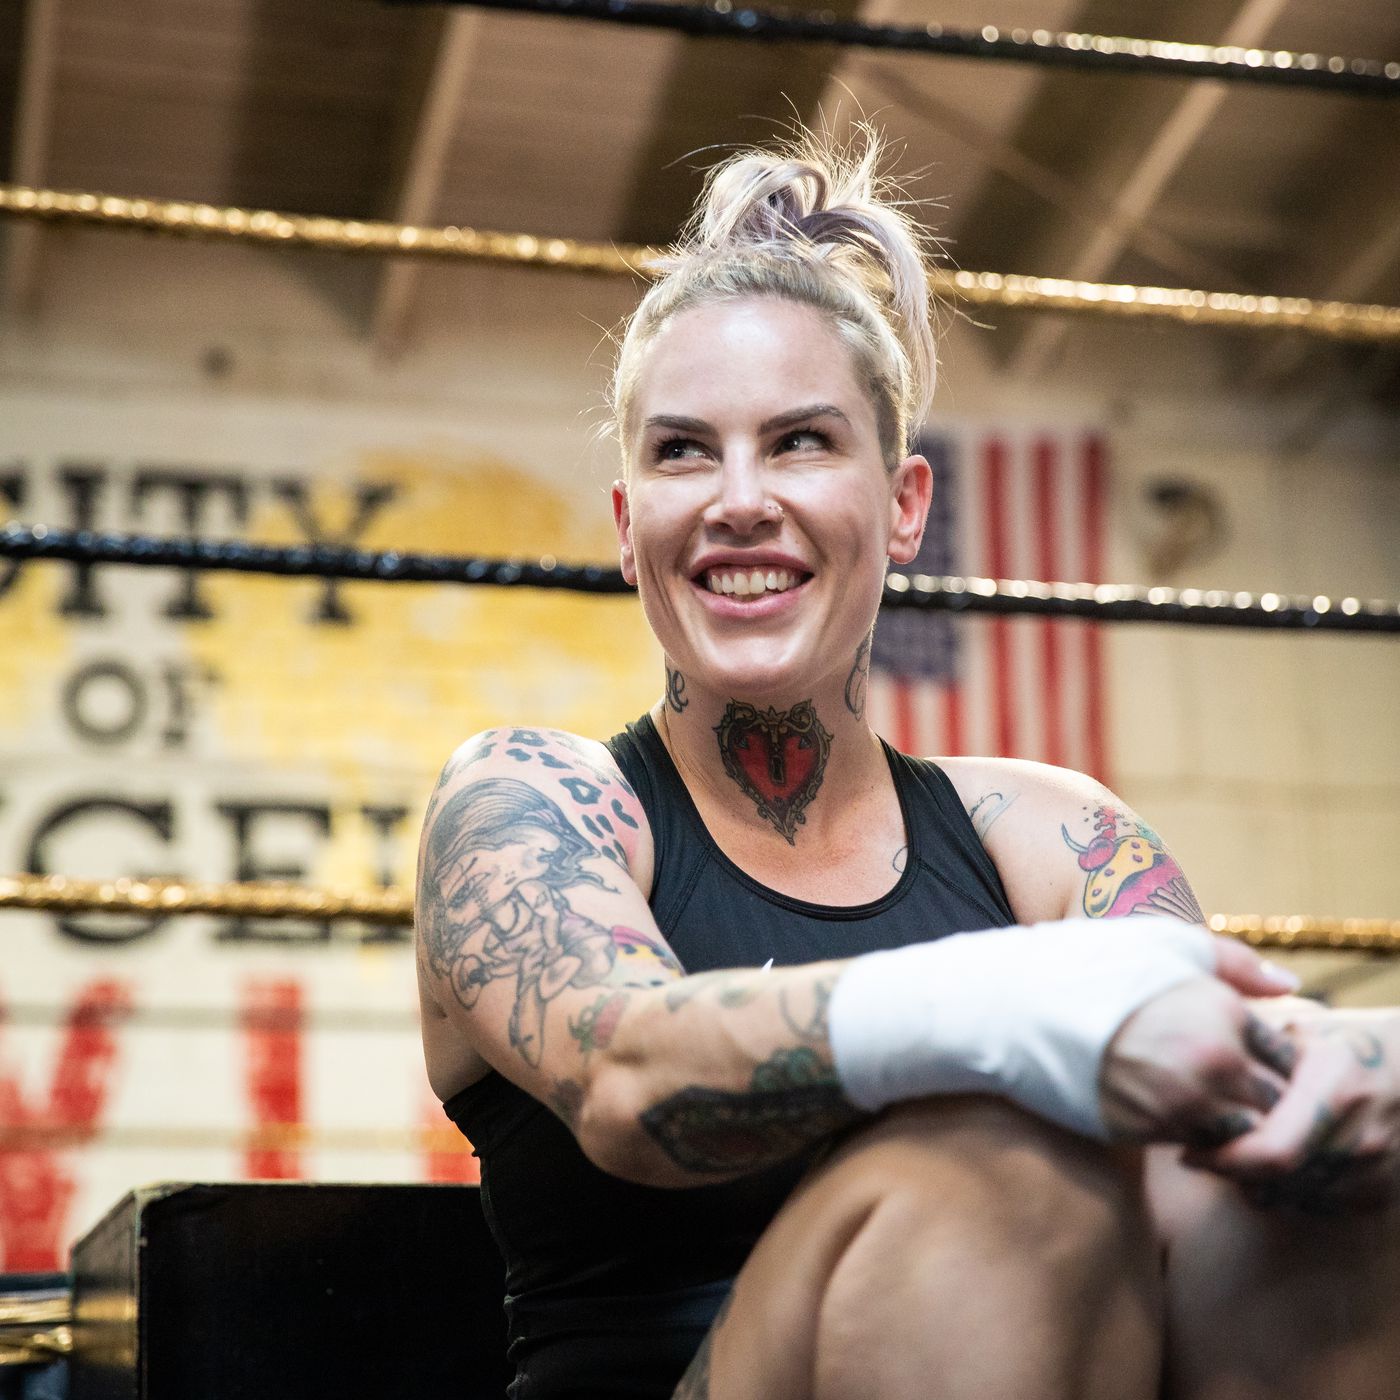 curt stafford recommends Bec Rawlings Only Fans